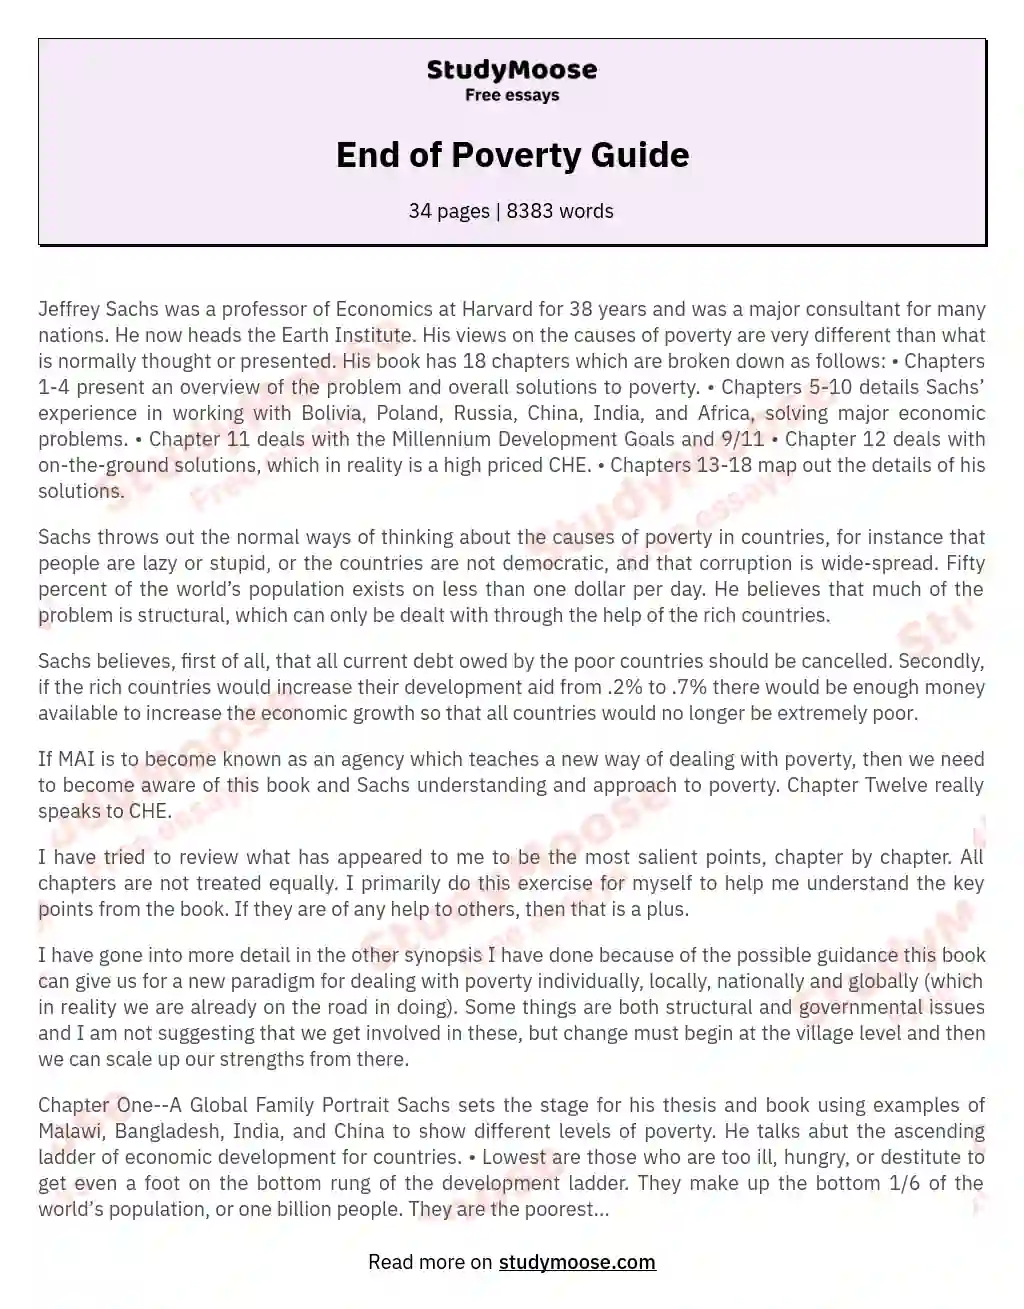 End of Poverty Guide essay